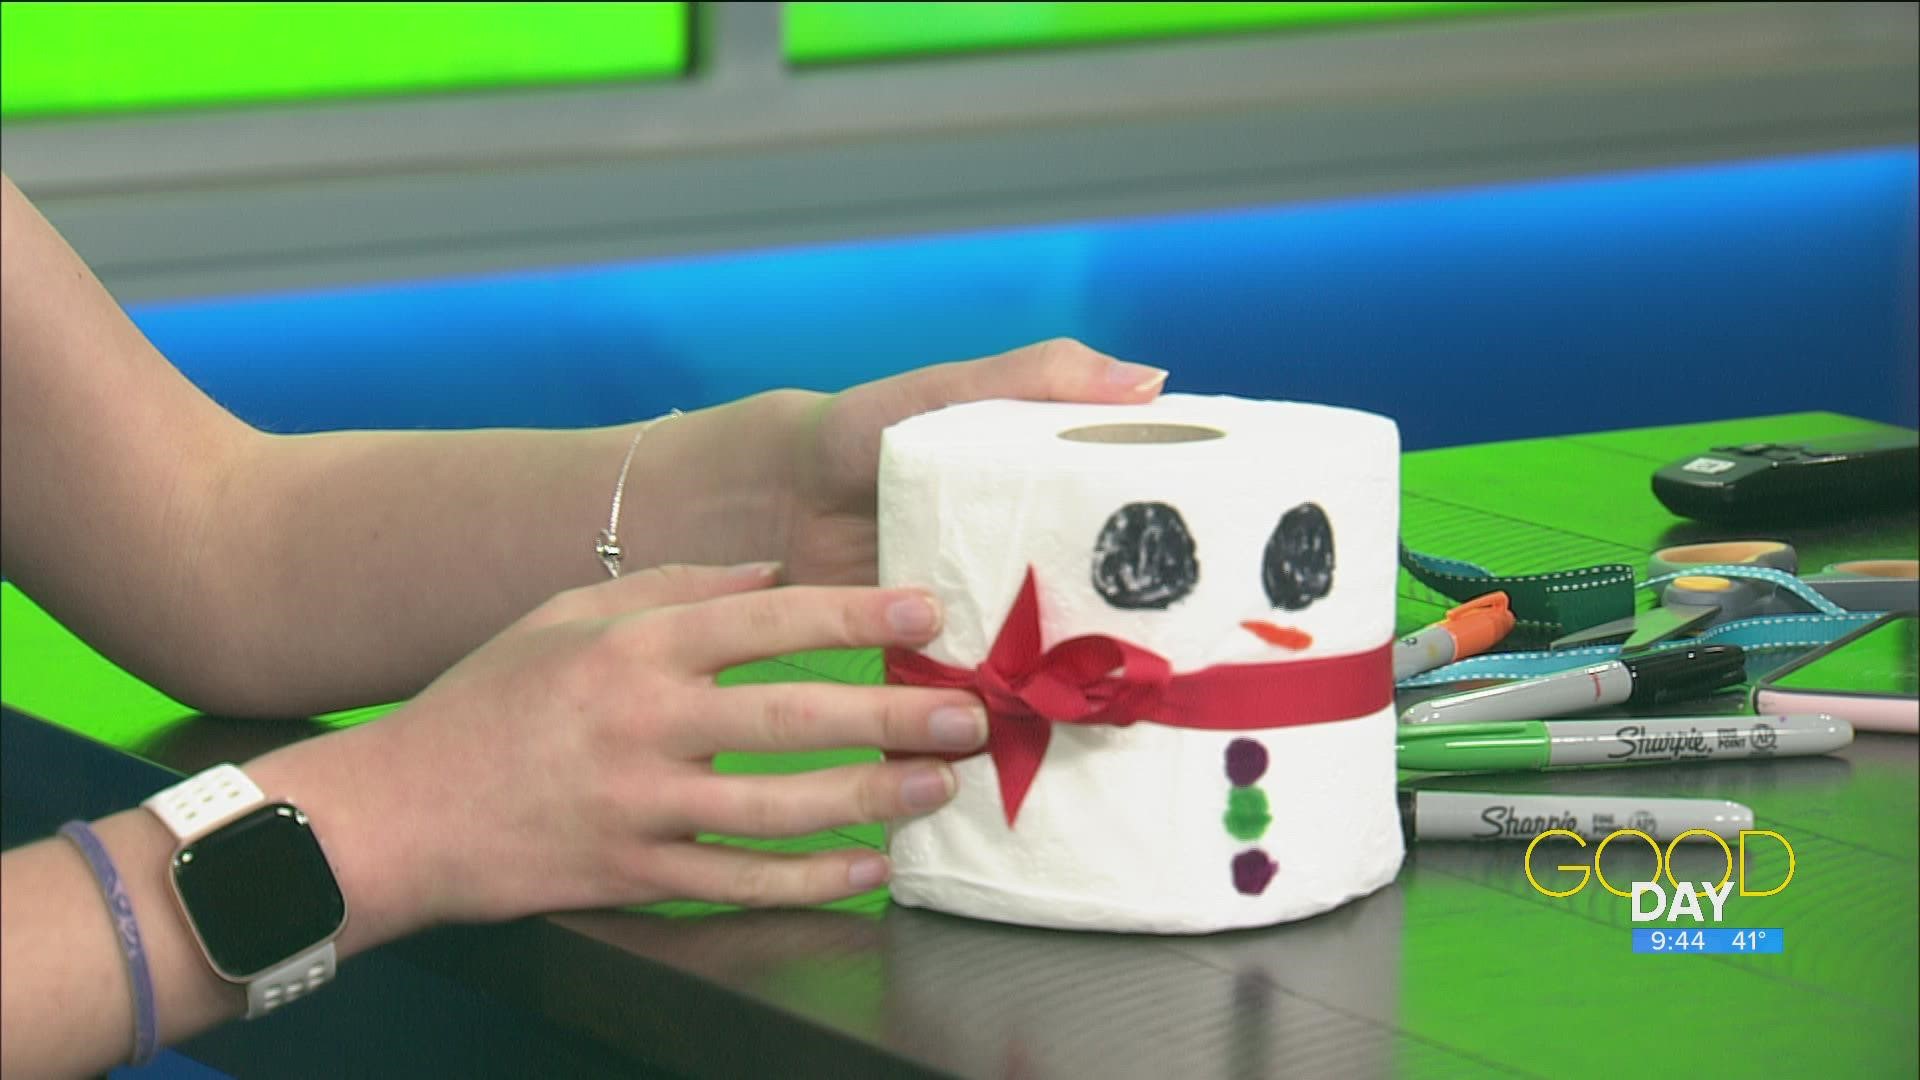 Amanda and Diane continue their seasonal toilet paper craft activities, this time with snowmen.